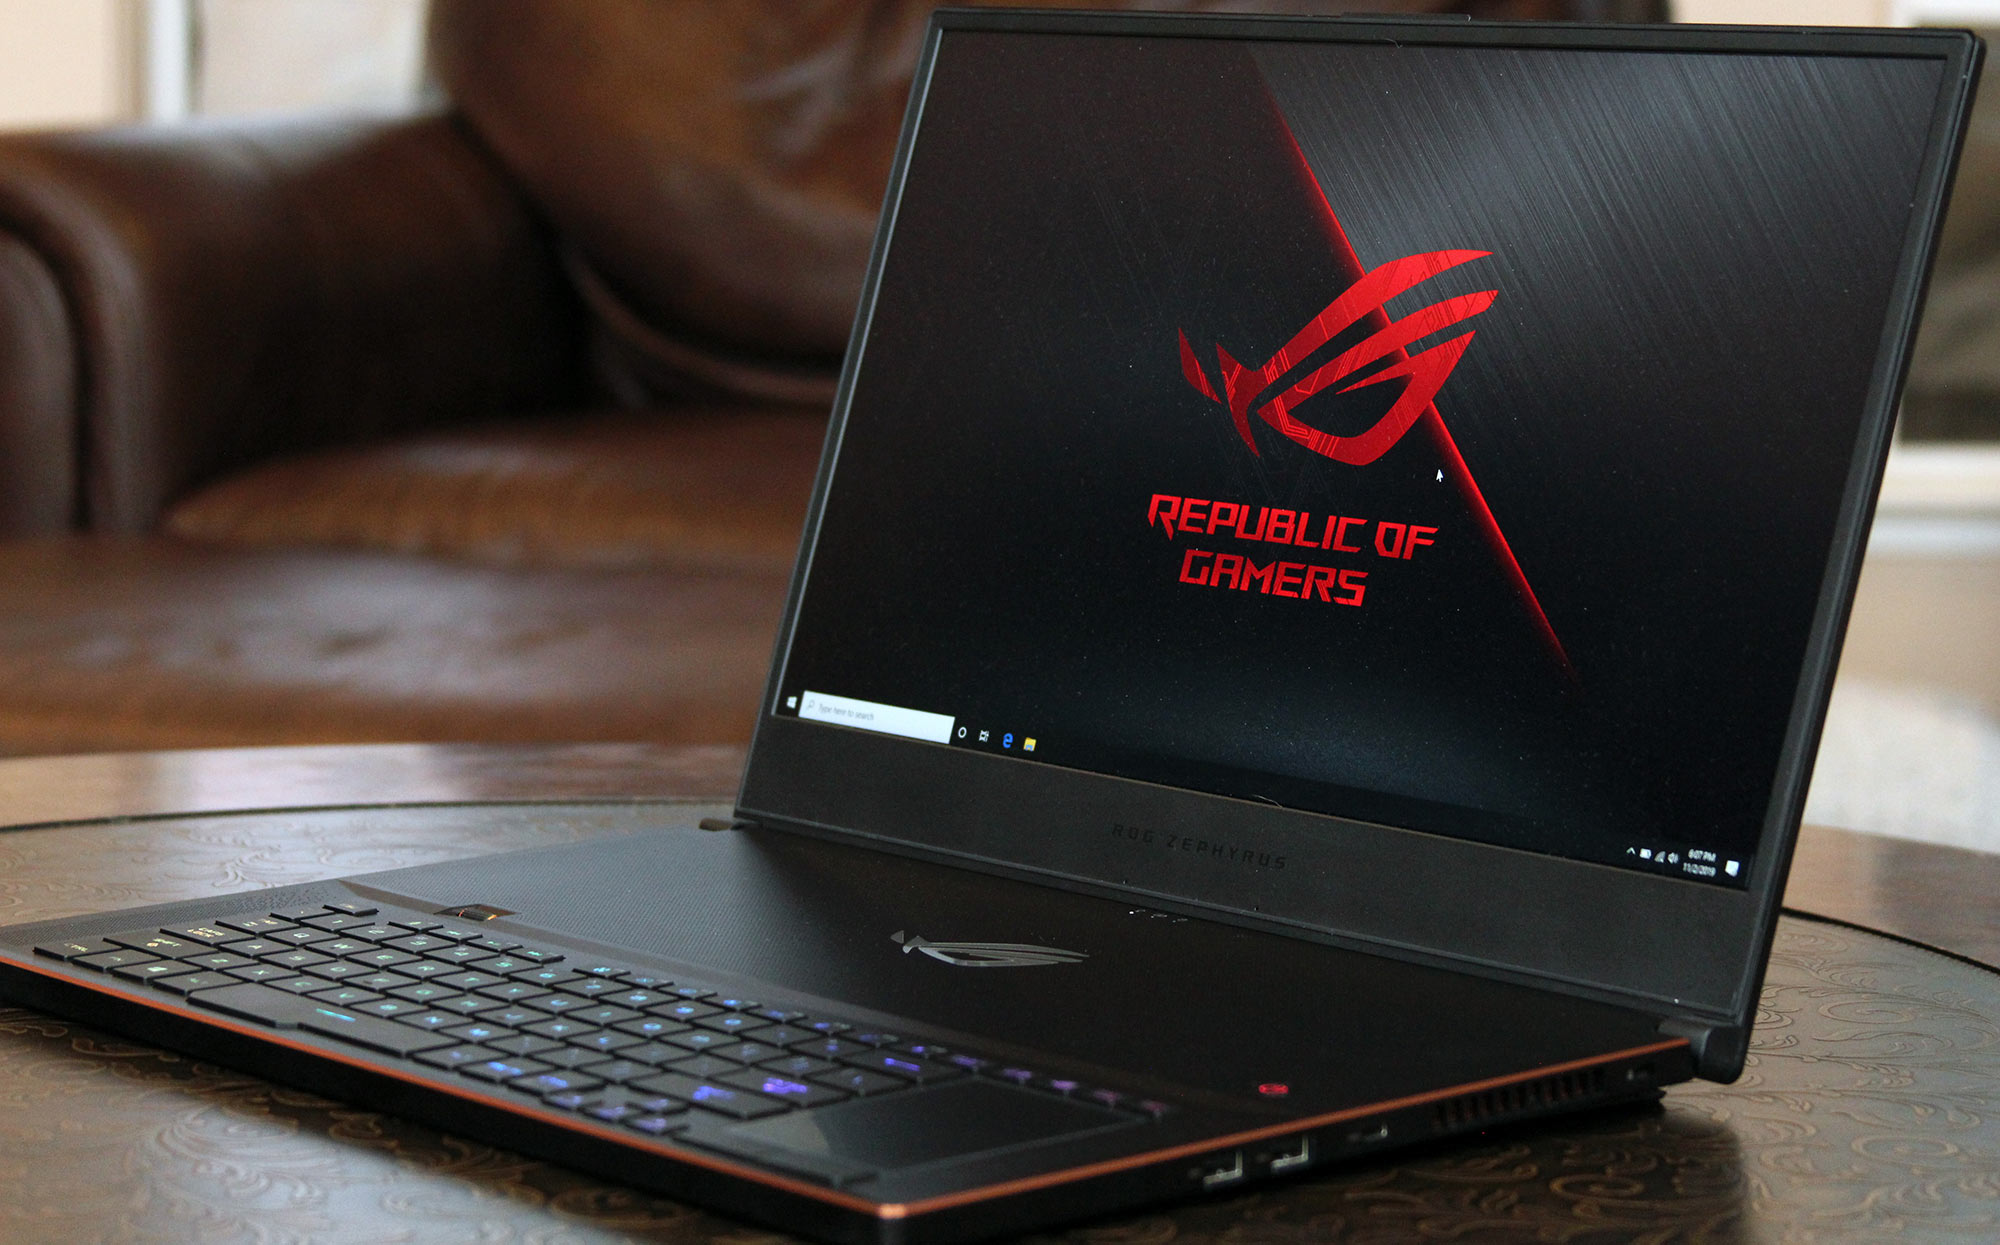 Life At 300hz Optimize Your Games To Take Advantage Of High Refresh Rates Rog Republic Of Gamers中国